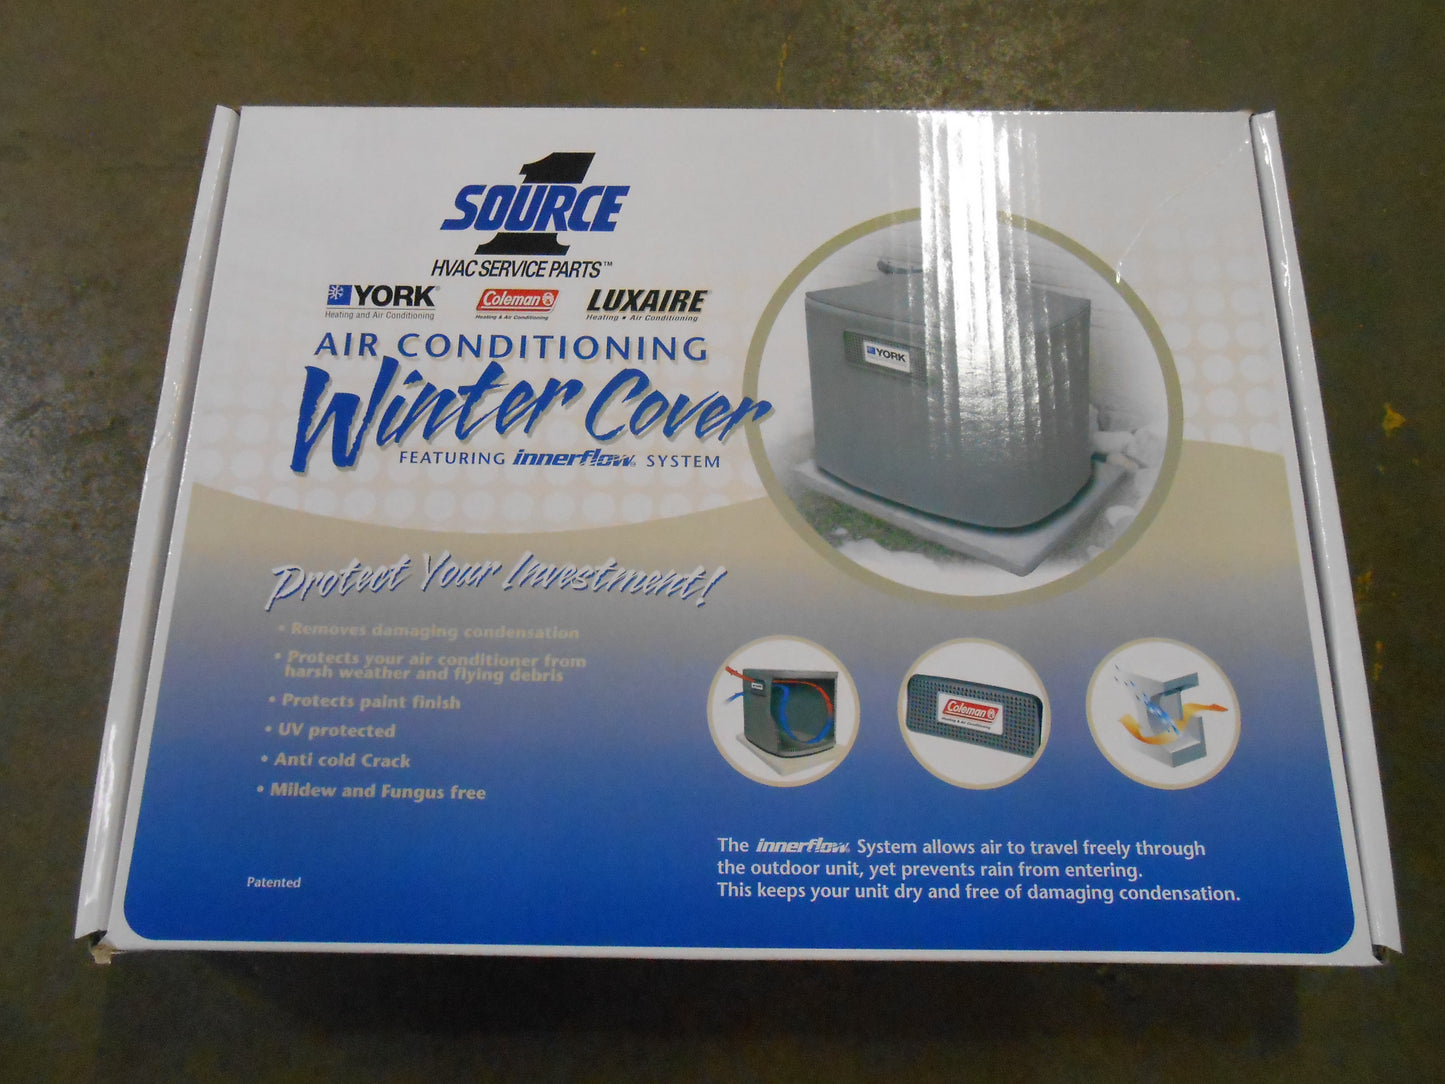 AIR CONDITIONING WINTER COVER FEATURING INNERFLOW SYSTEM